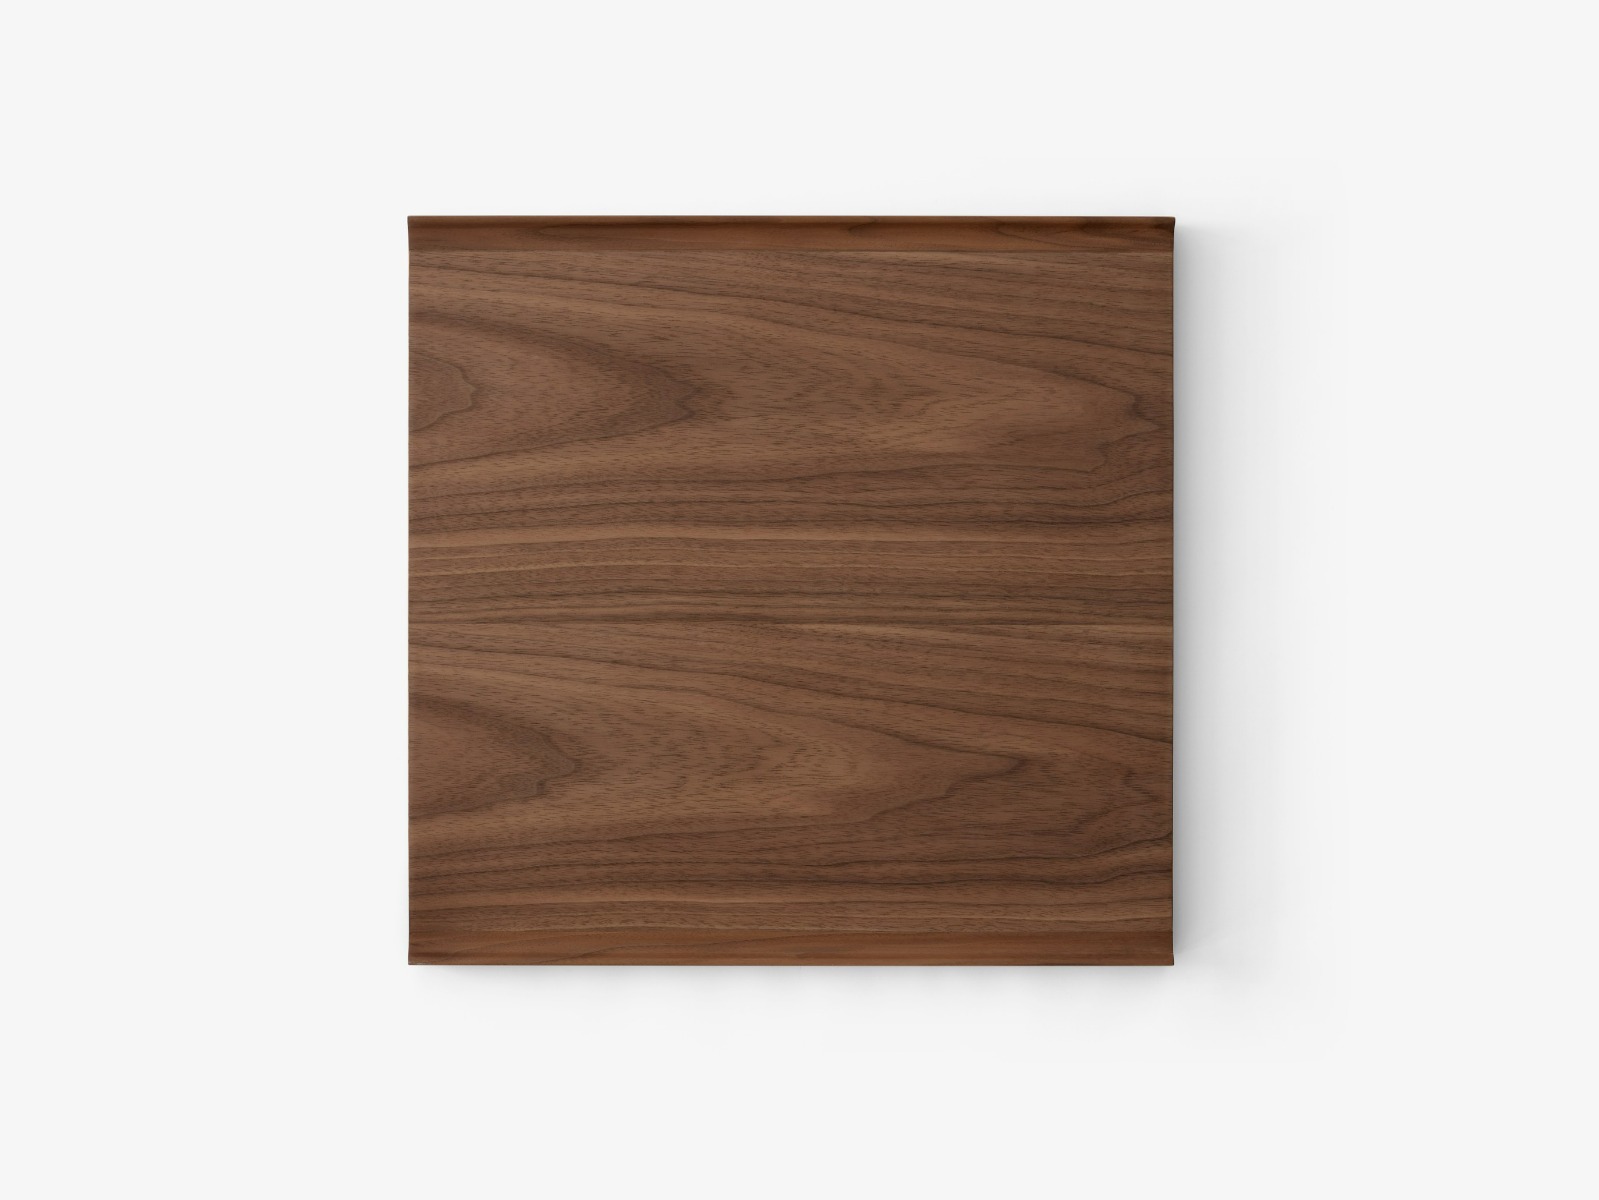 https://www.fundesign.nl/media/catalog/product/a/l/alima_nds1_walnut_tray_top_1.jpg